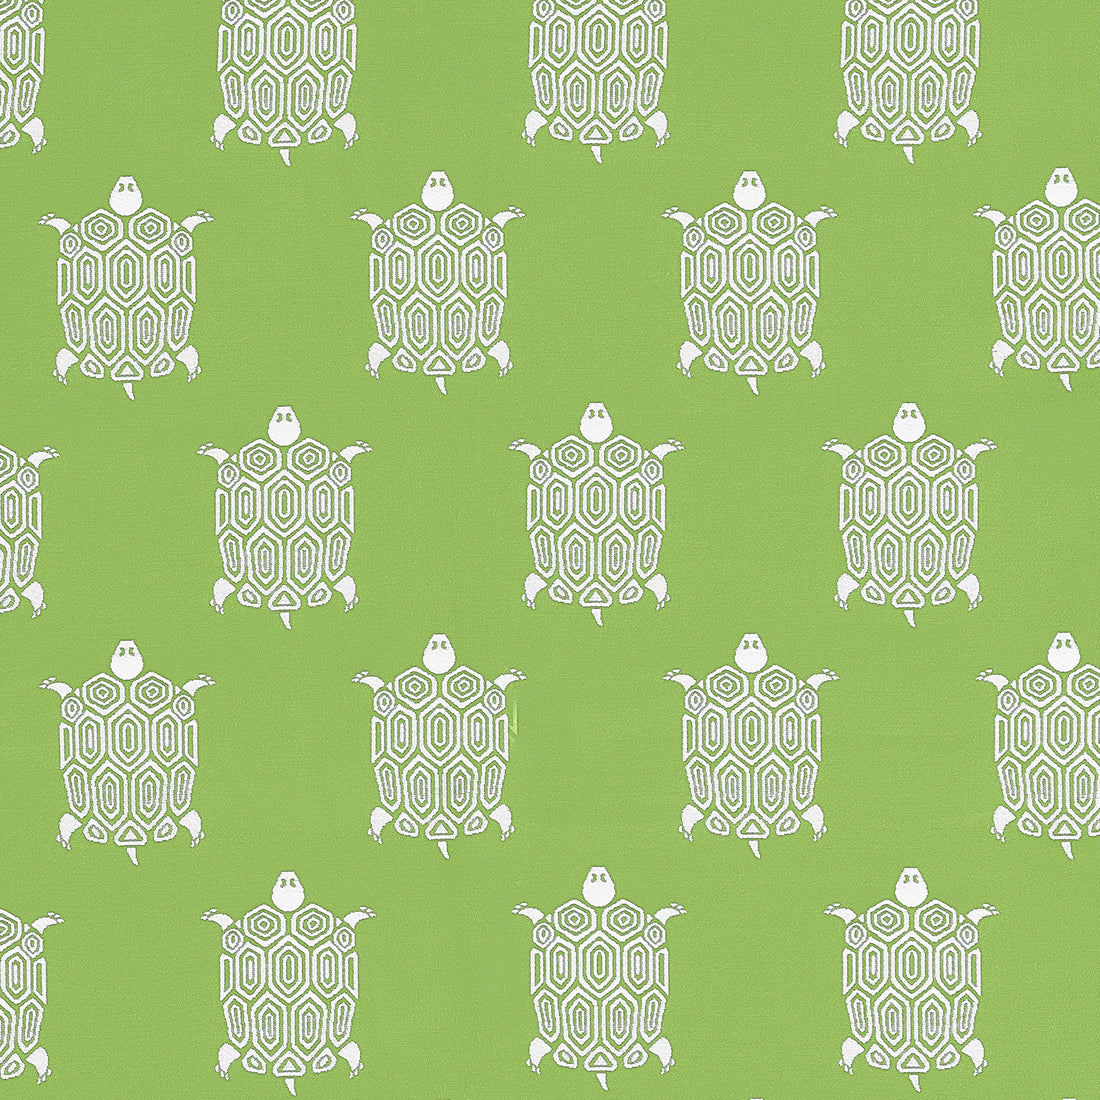 Turtle Bay fabric in kiwi color - pattern number W81624 - by Thibaut in the Locale collection